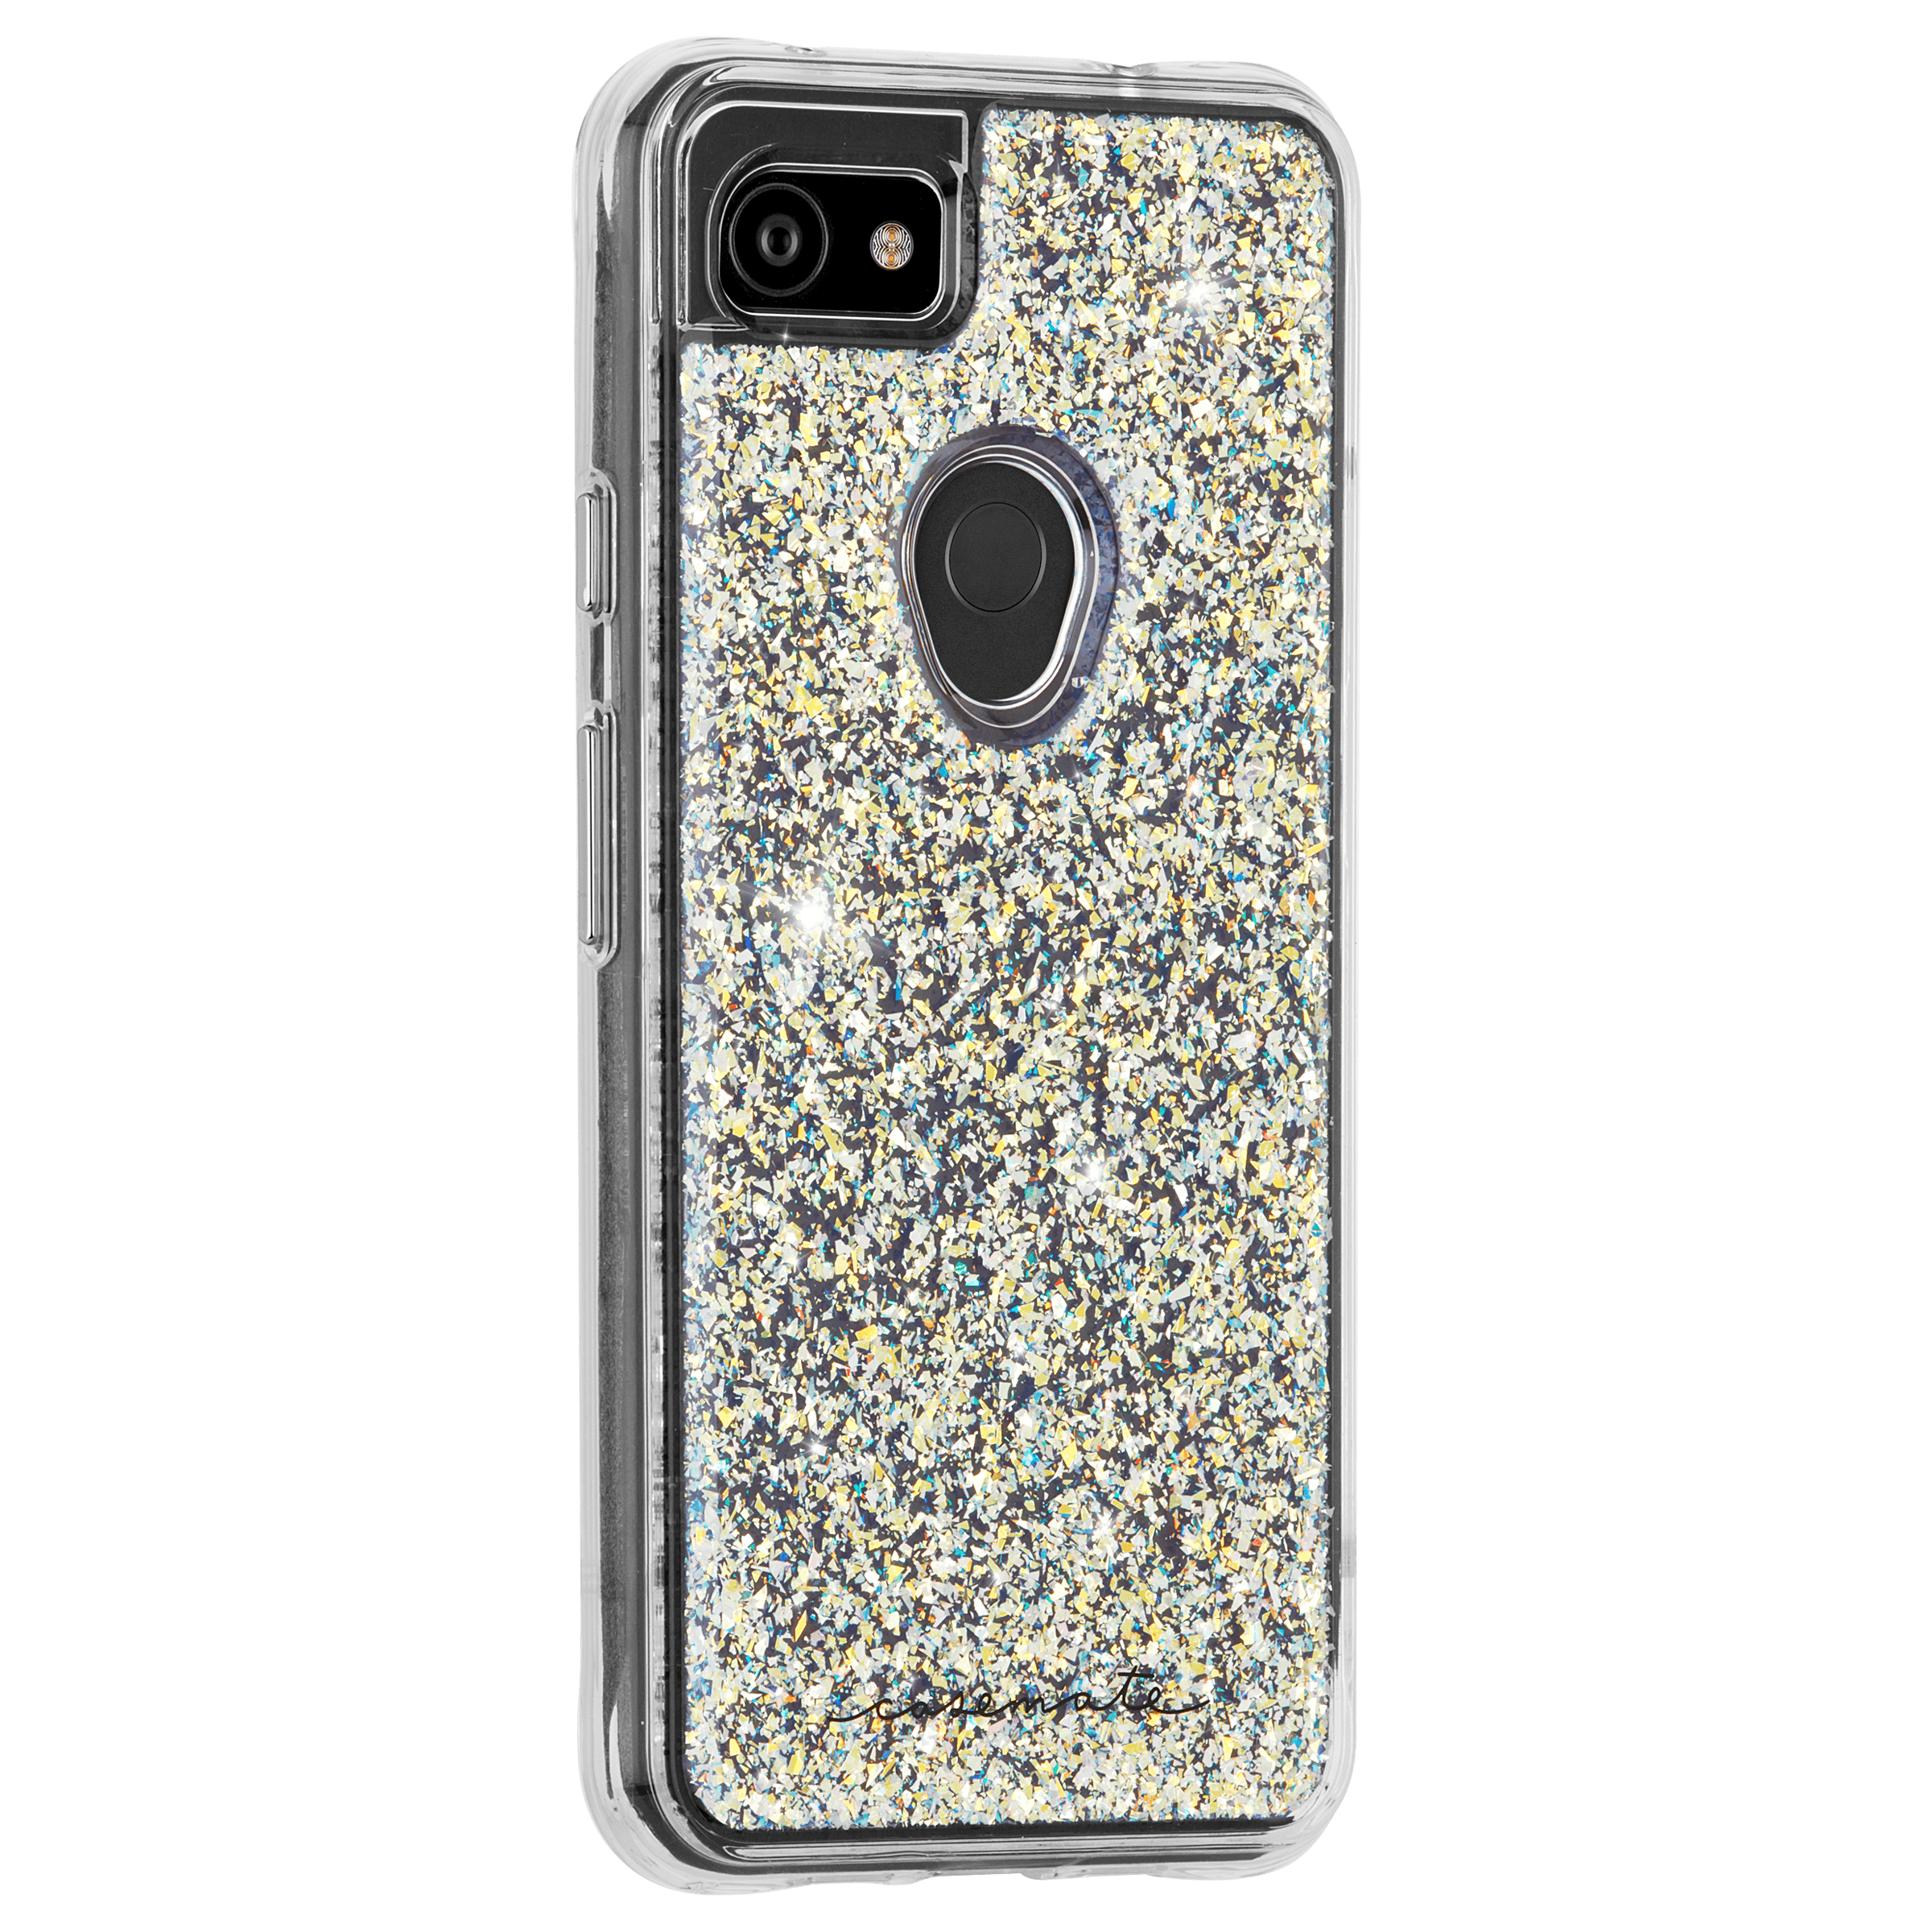 Twinkle for Pixel 3a color::Twinkle Stardust